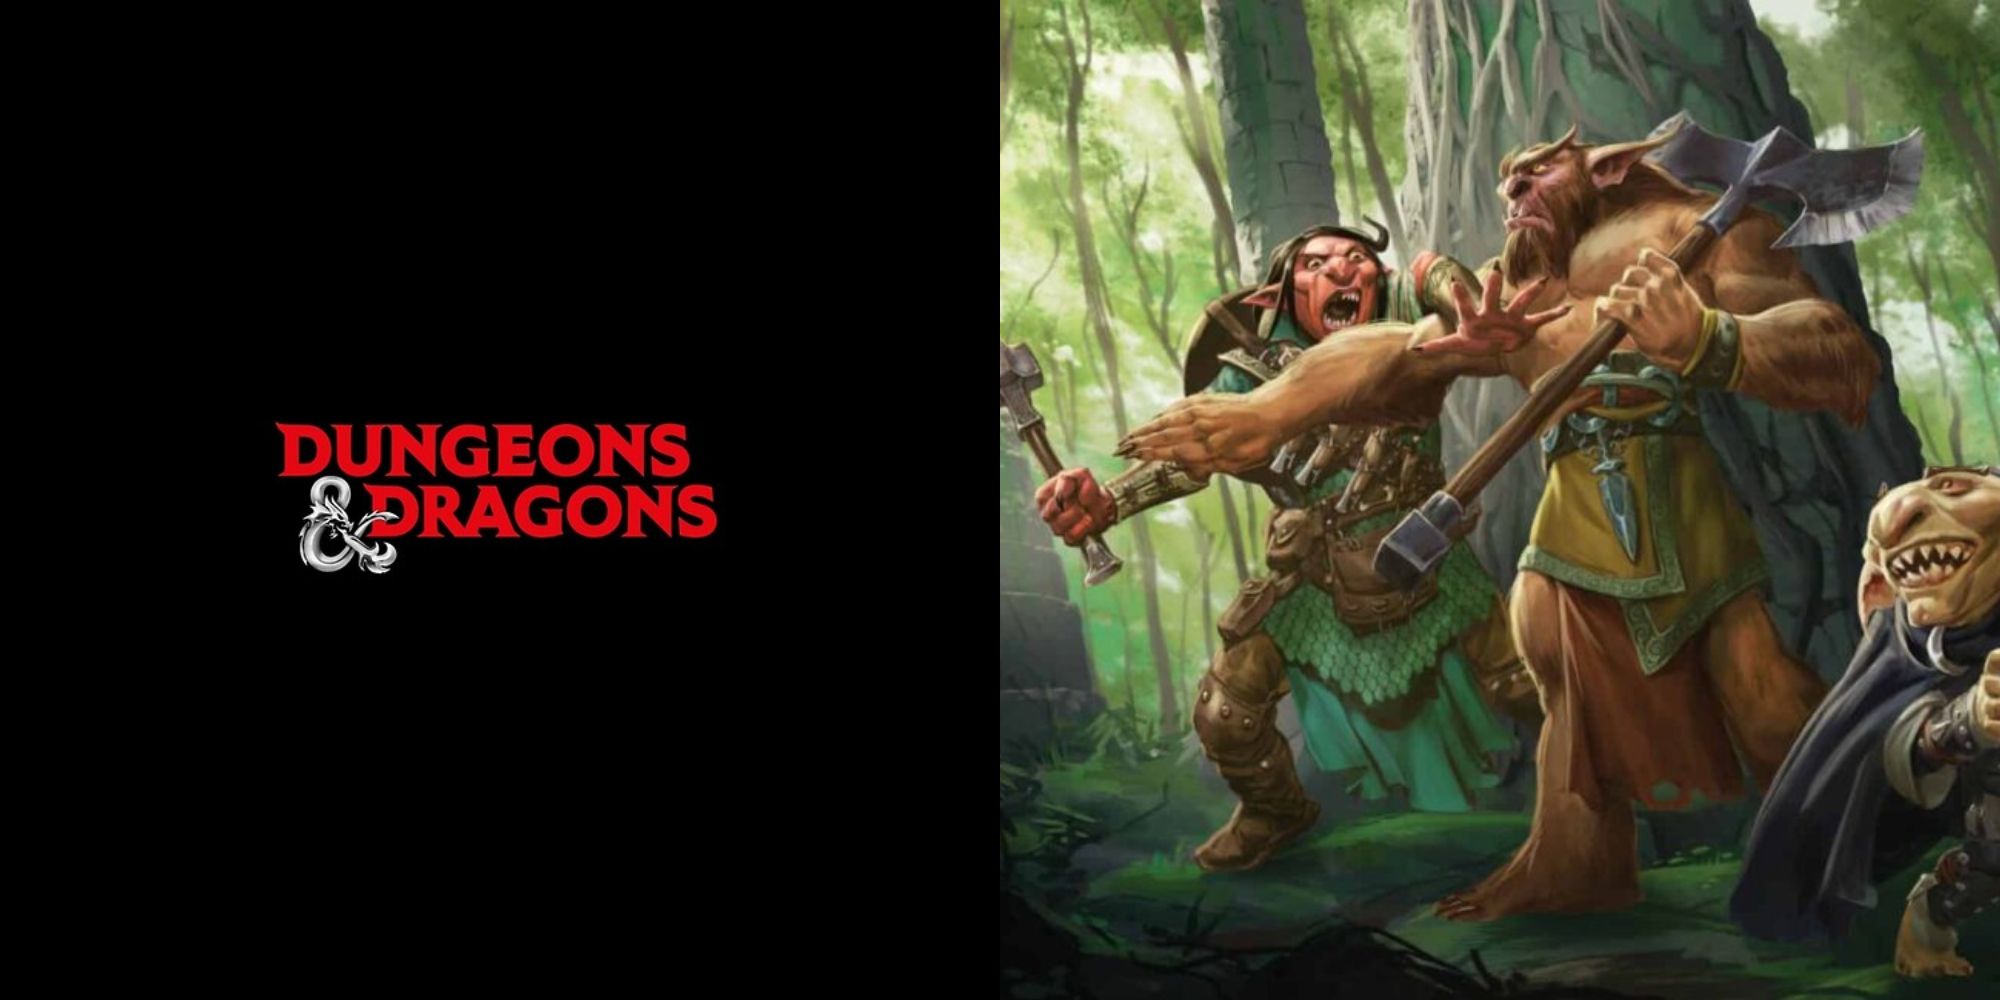 Split image showing a Dungeons & Dragons logo and artwork of a Bugbear.